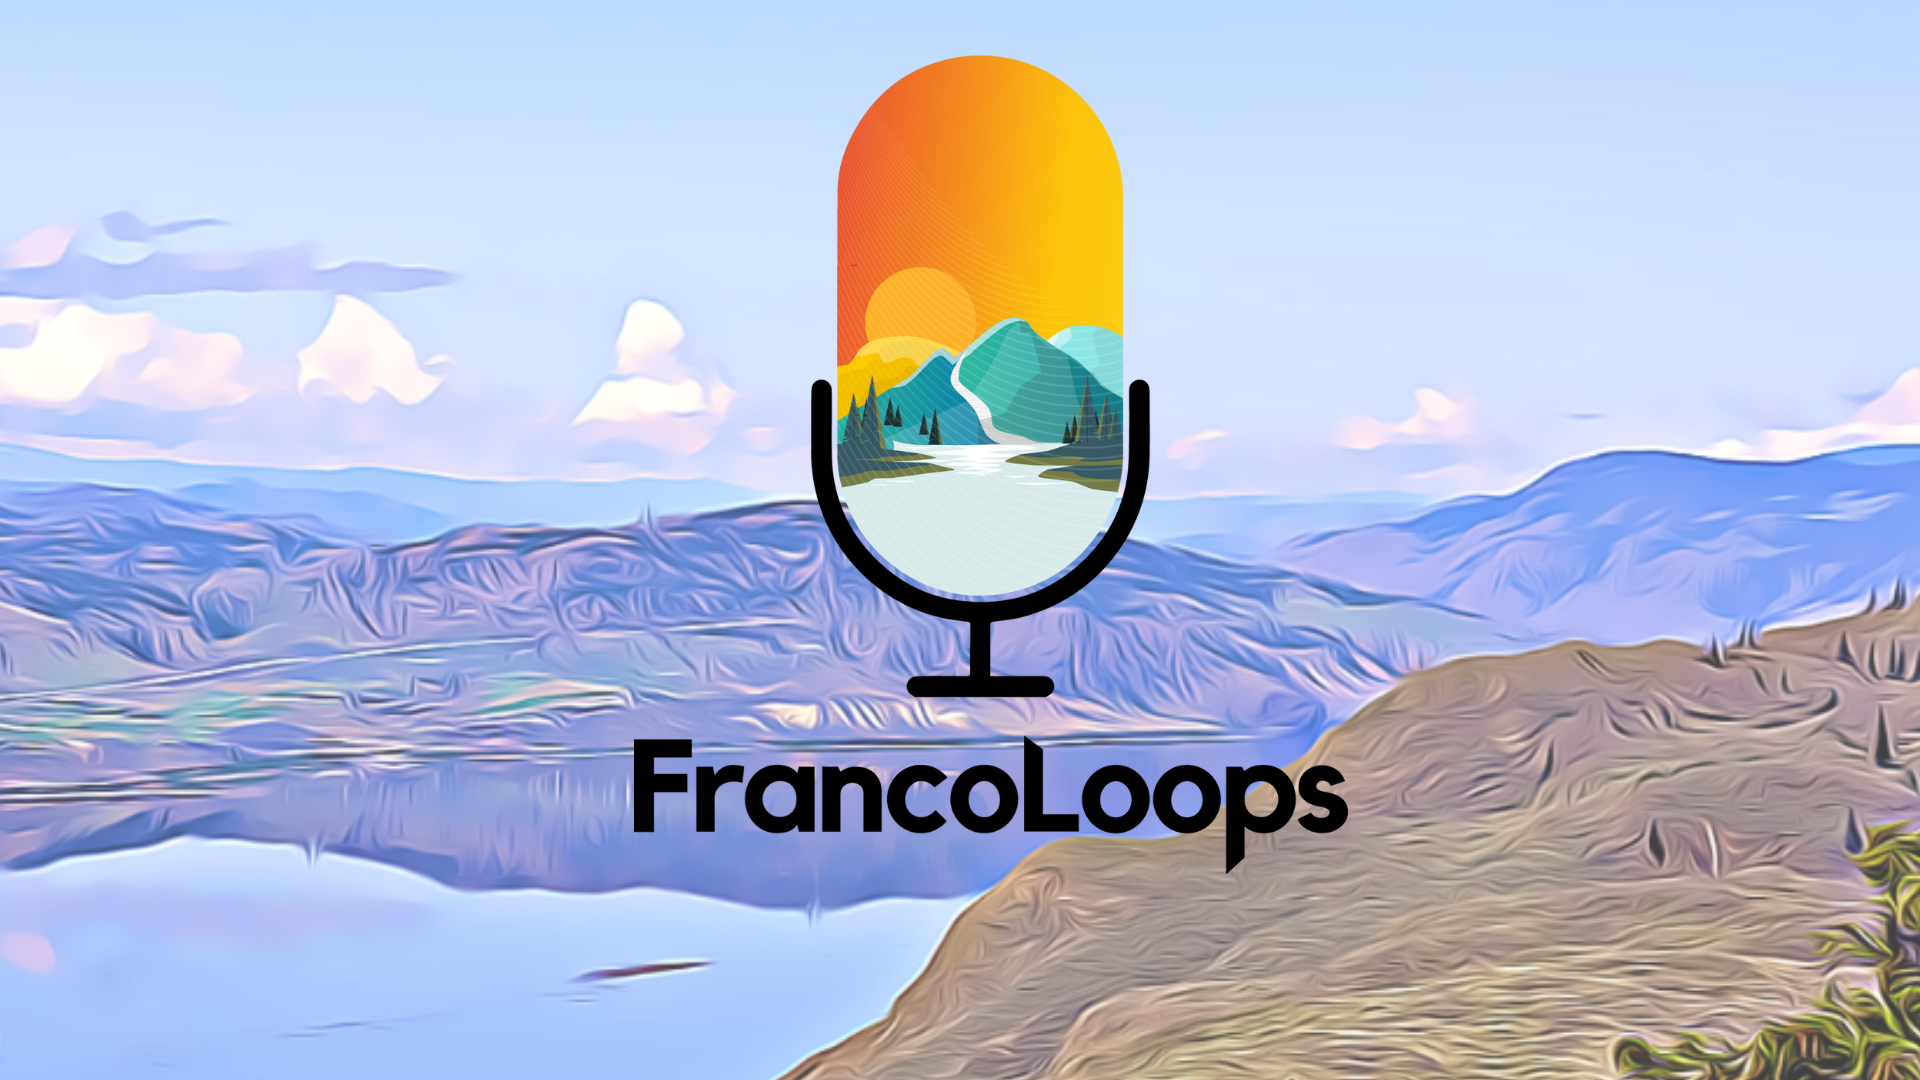 FRANCOLOOPS